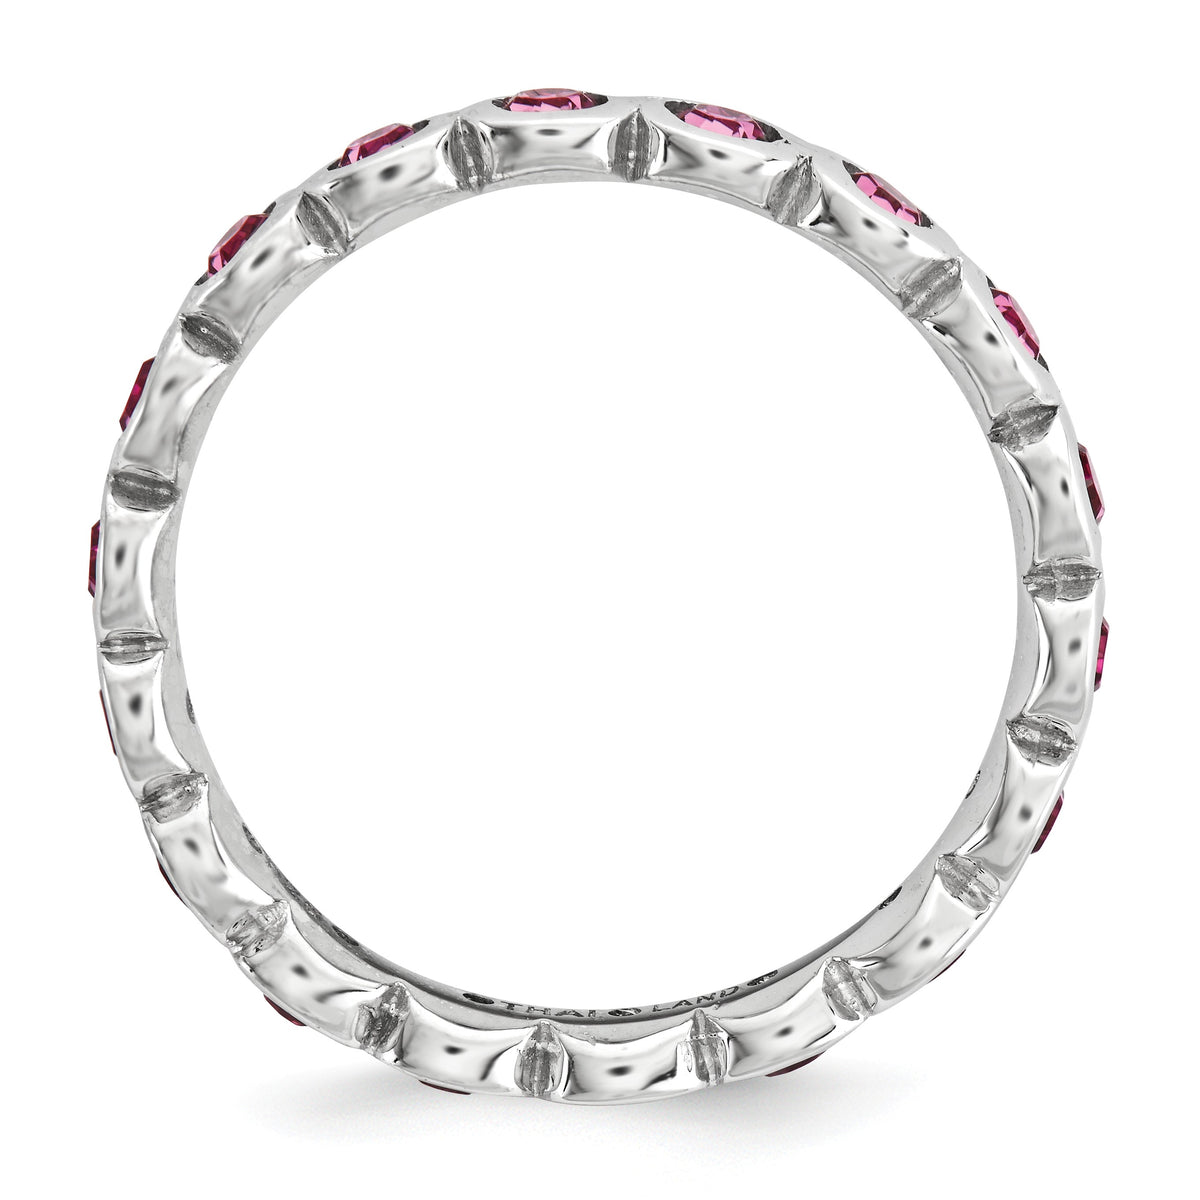 Alternate view of the 3.5mm Sterling Silver with Pink Crystals Stackable Band by The Black Bow Jewelry Co.